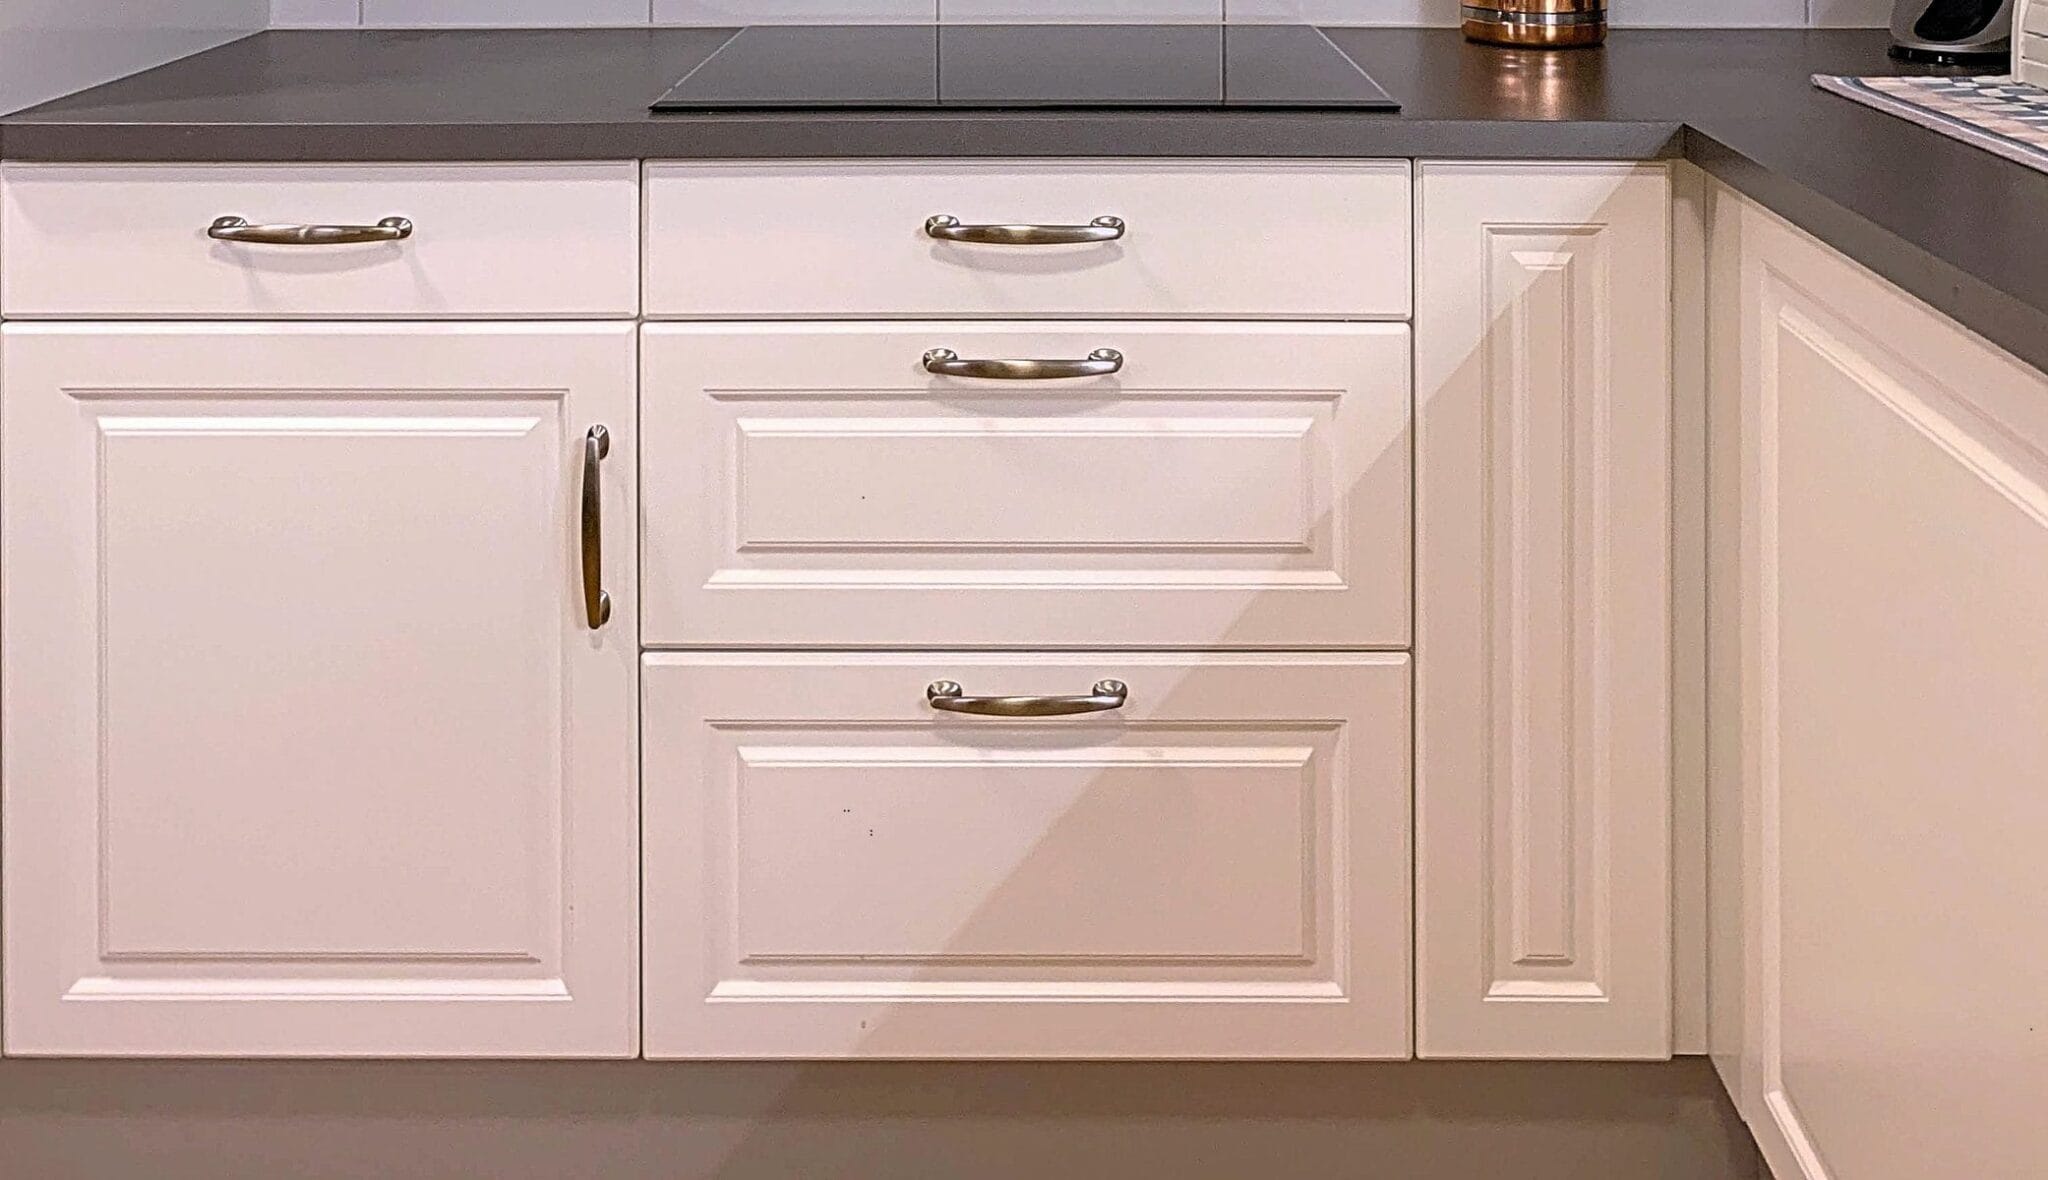  kitchen cabinet replacement doors and drawer fronts